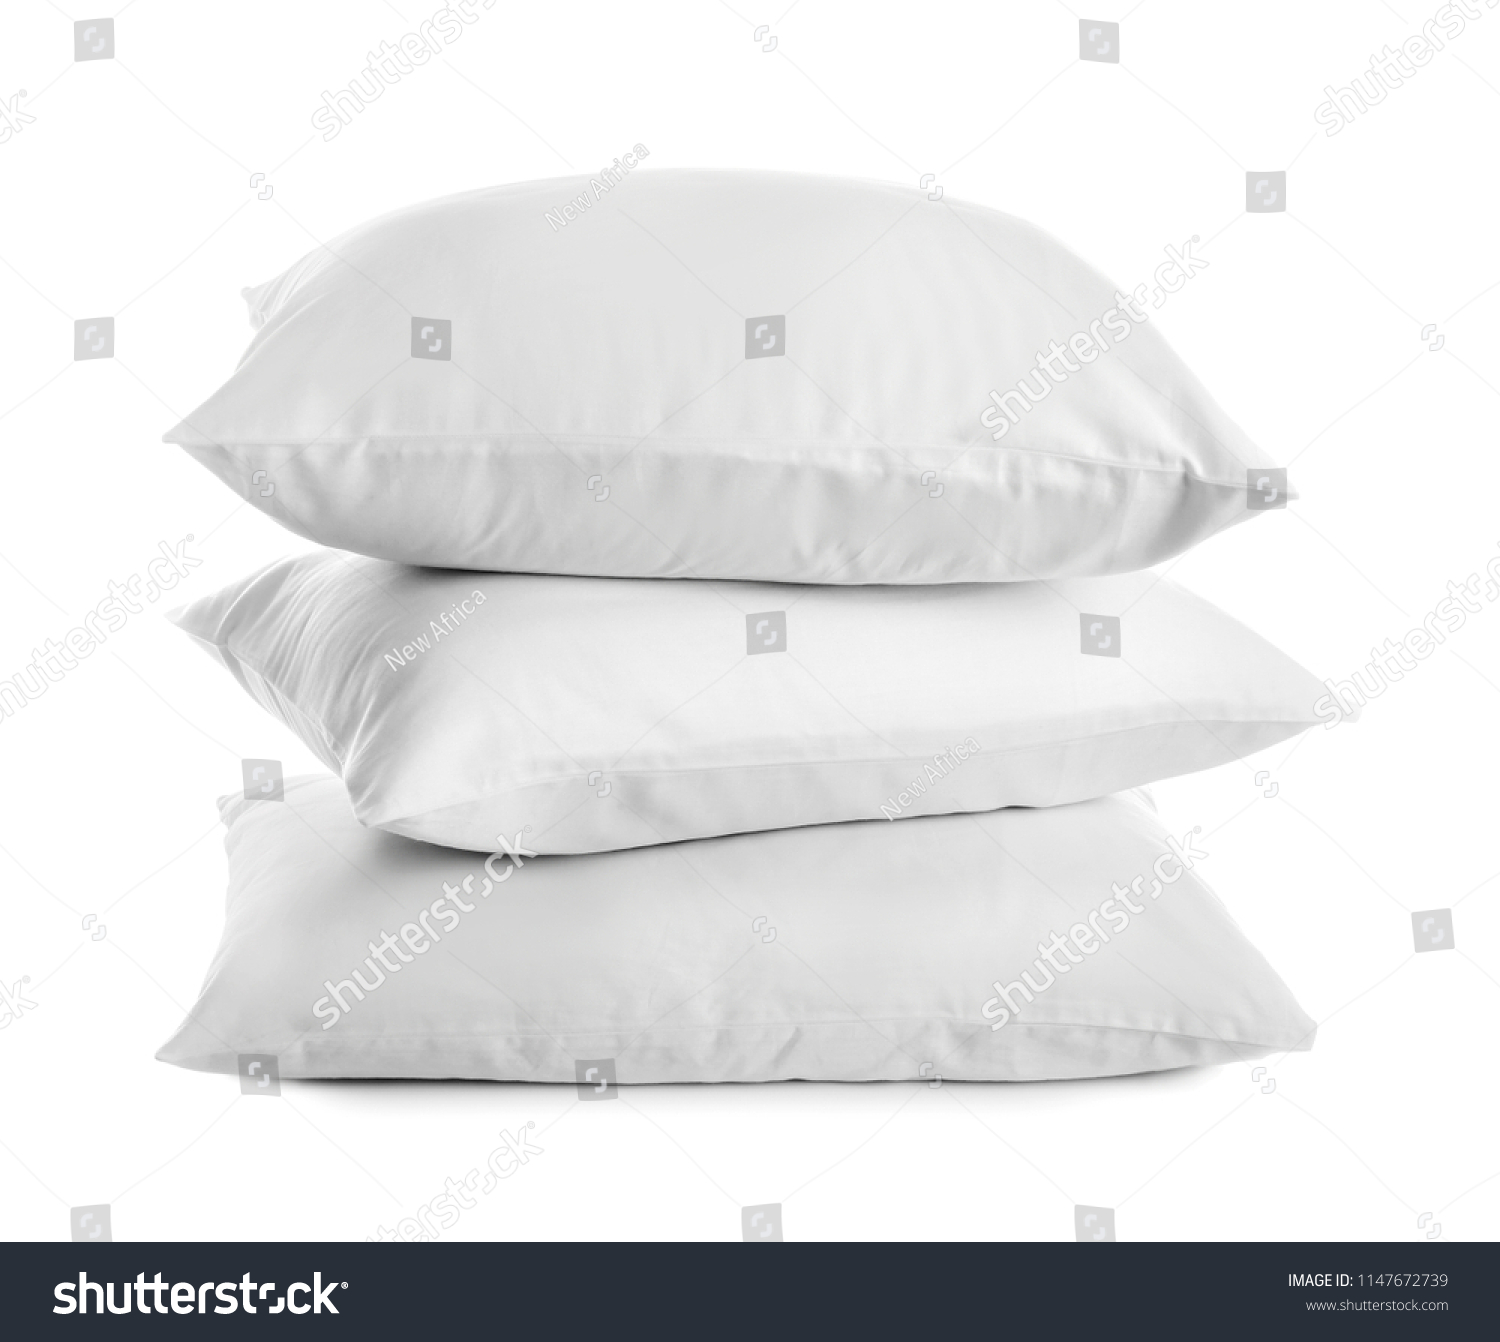 Clean soft bed pillows on white background #1147672739